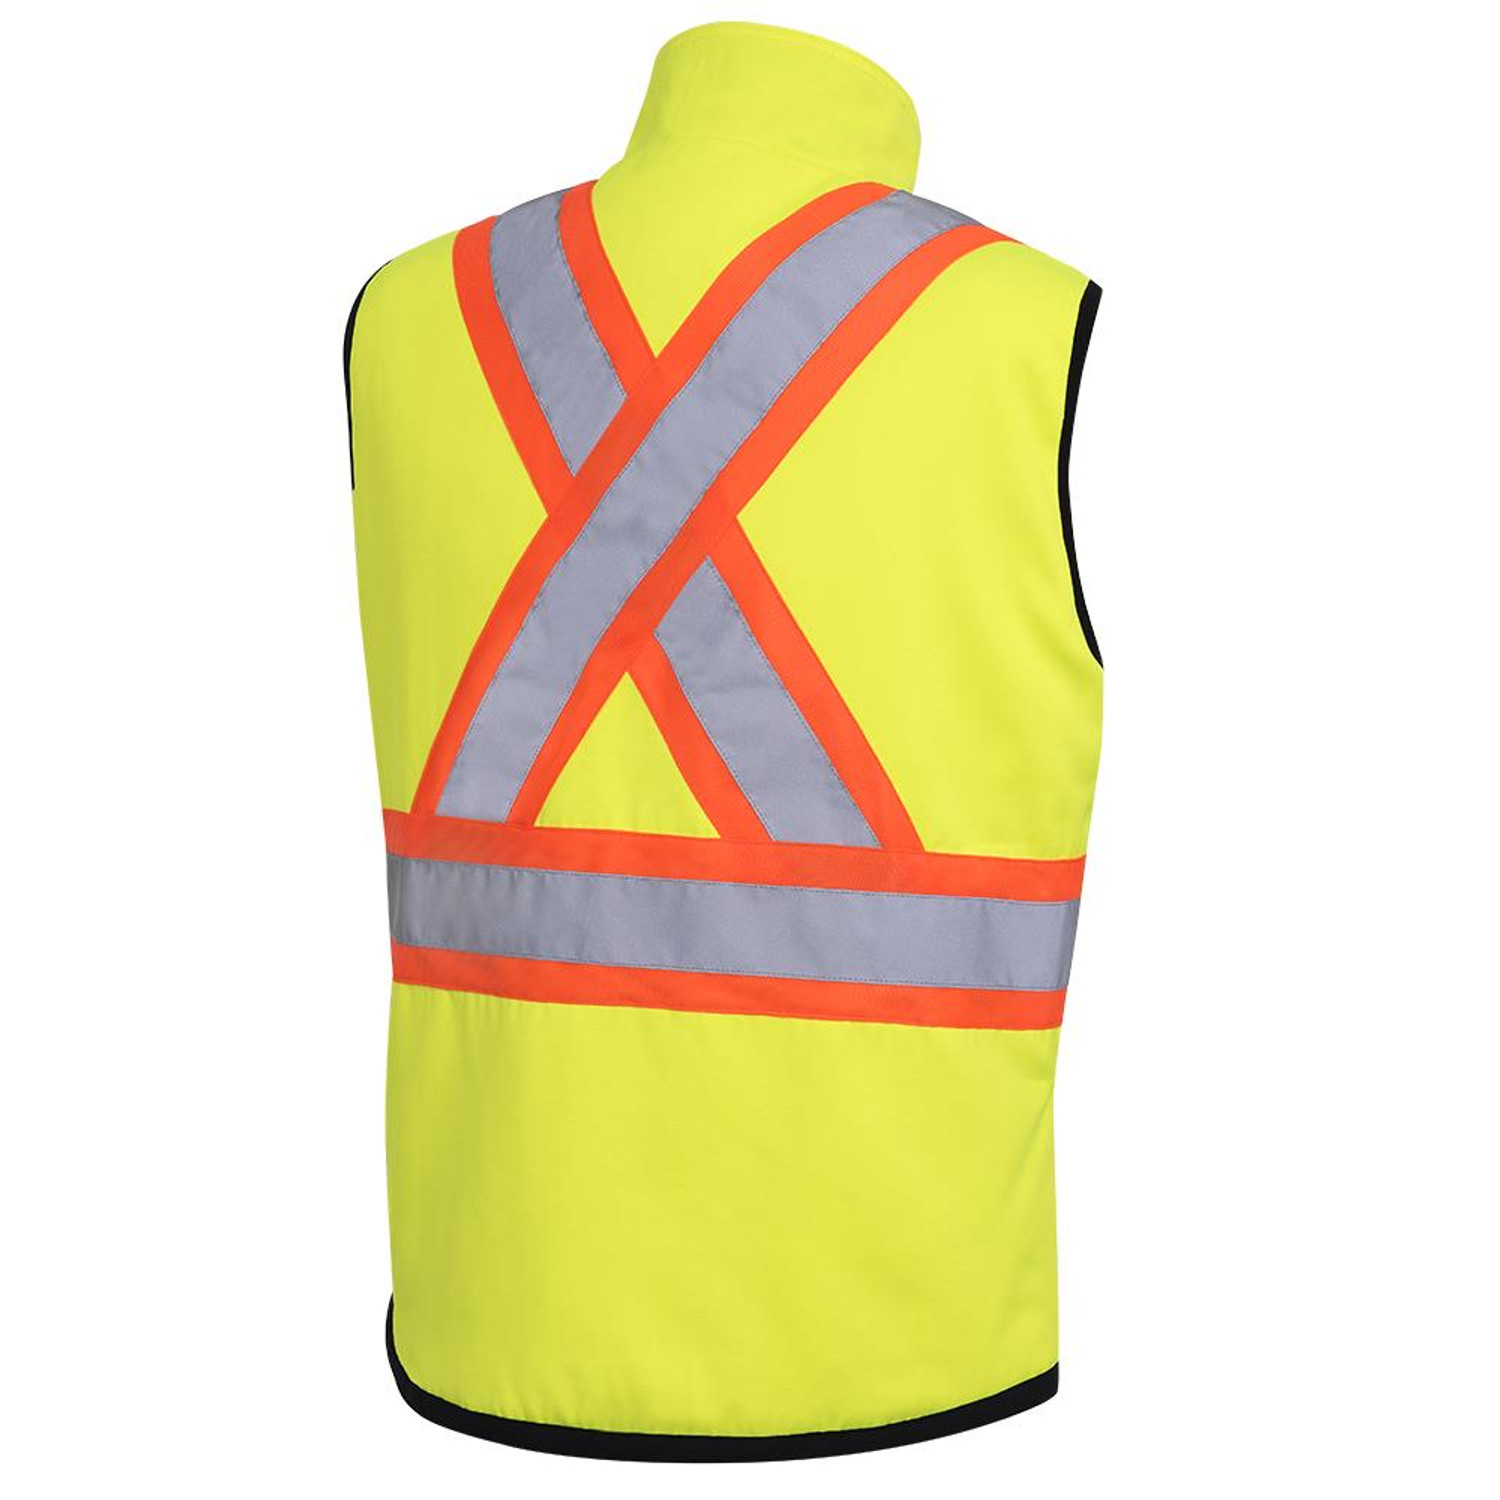 https://cdn11.bigcommerce.com/s-10f42/images/stencil/1500x1500/products/1738/9514/pioneer-safety-vest-safetywear.ca-hi-vis-yellow-back__32423.1702325280.jpg?c=2?imbypass=on